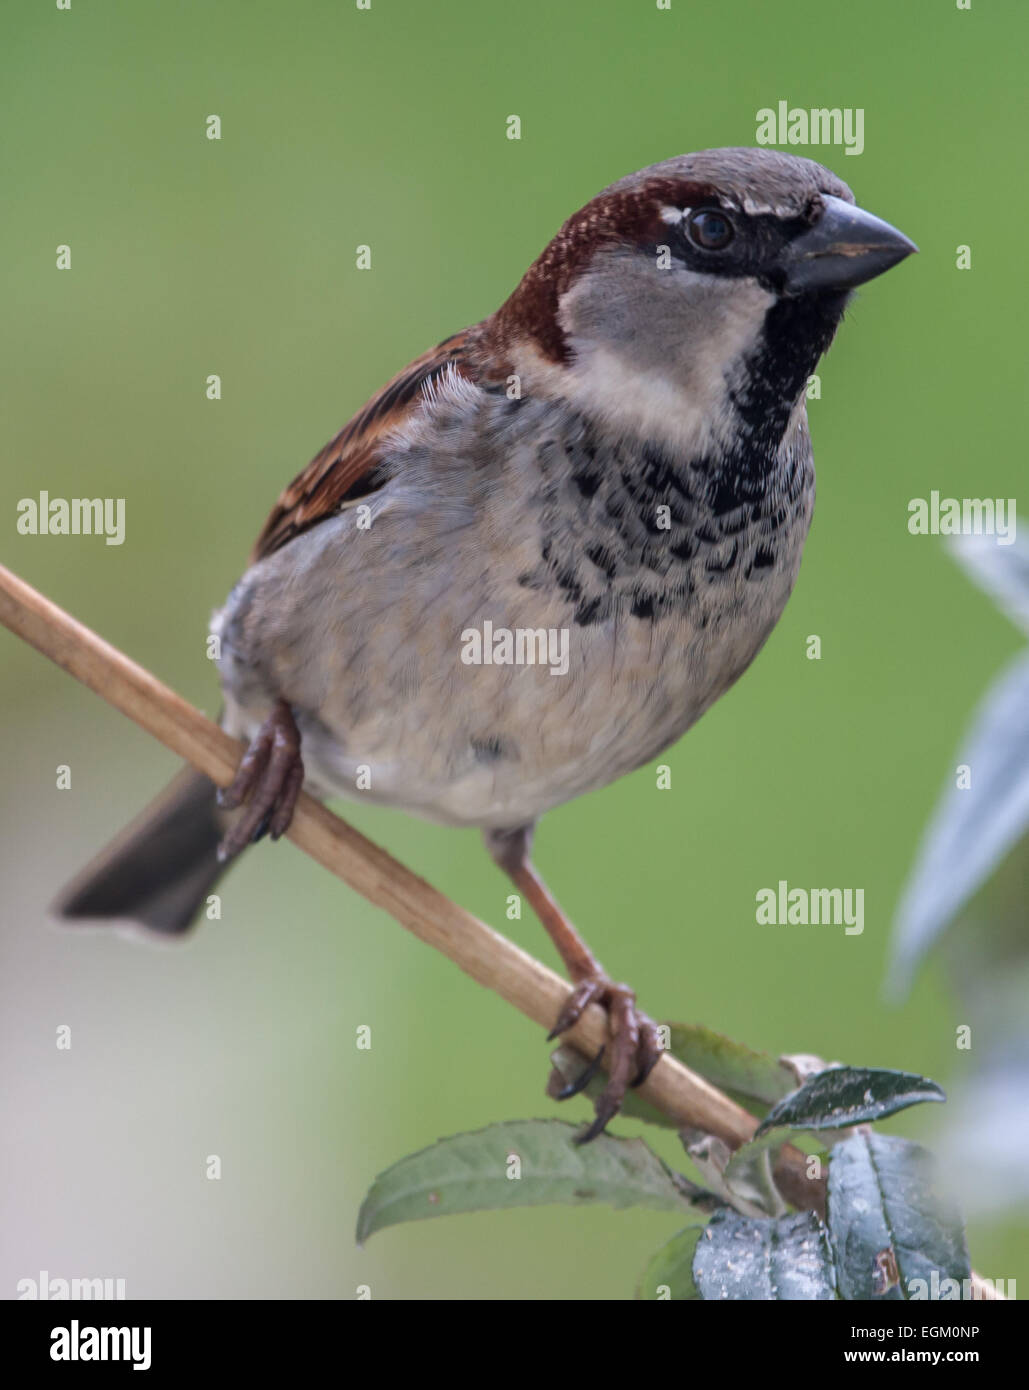 Male House Sparrow perched on a twig Stock Photo